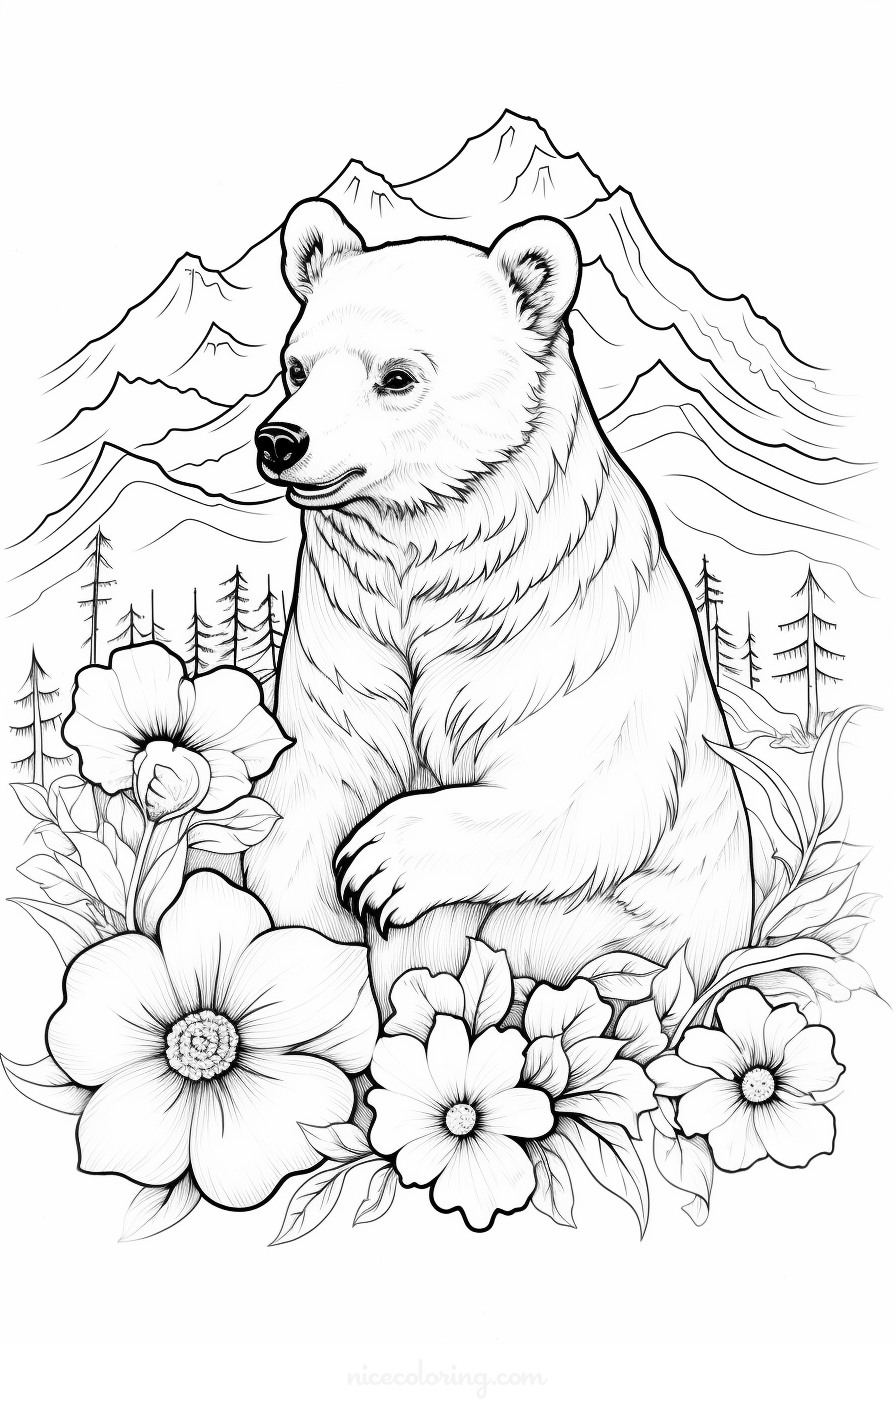 bear in a forest coloring scene